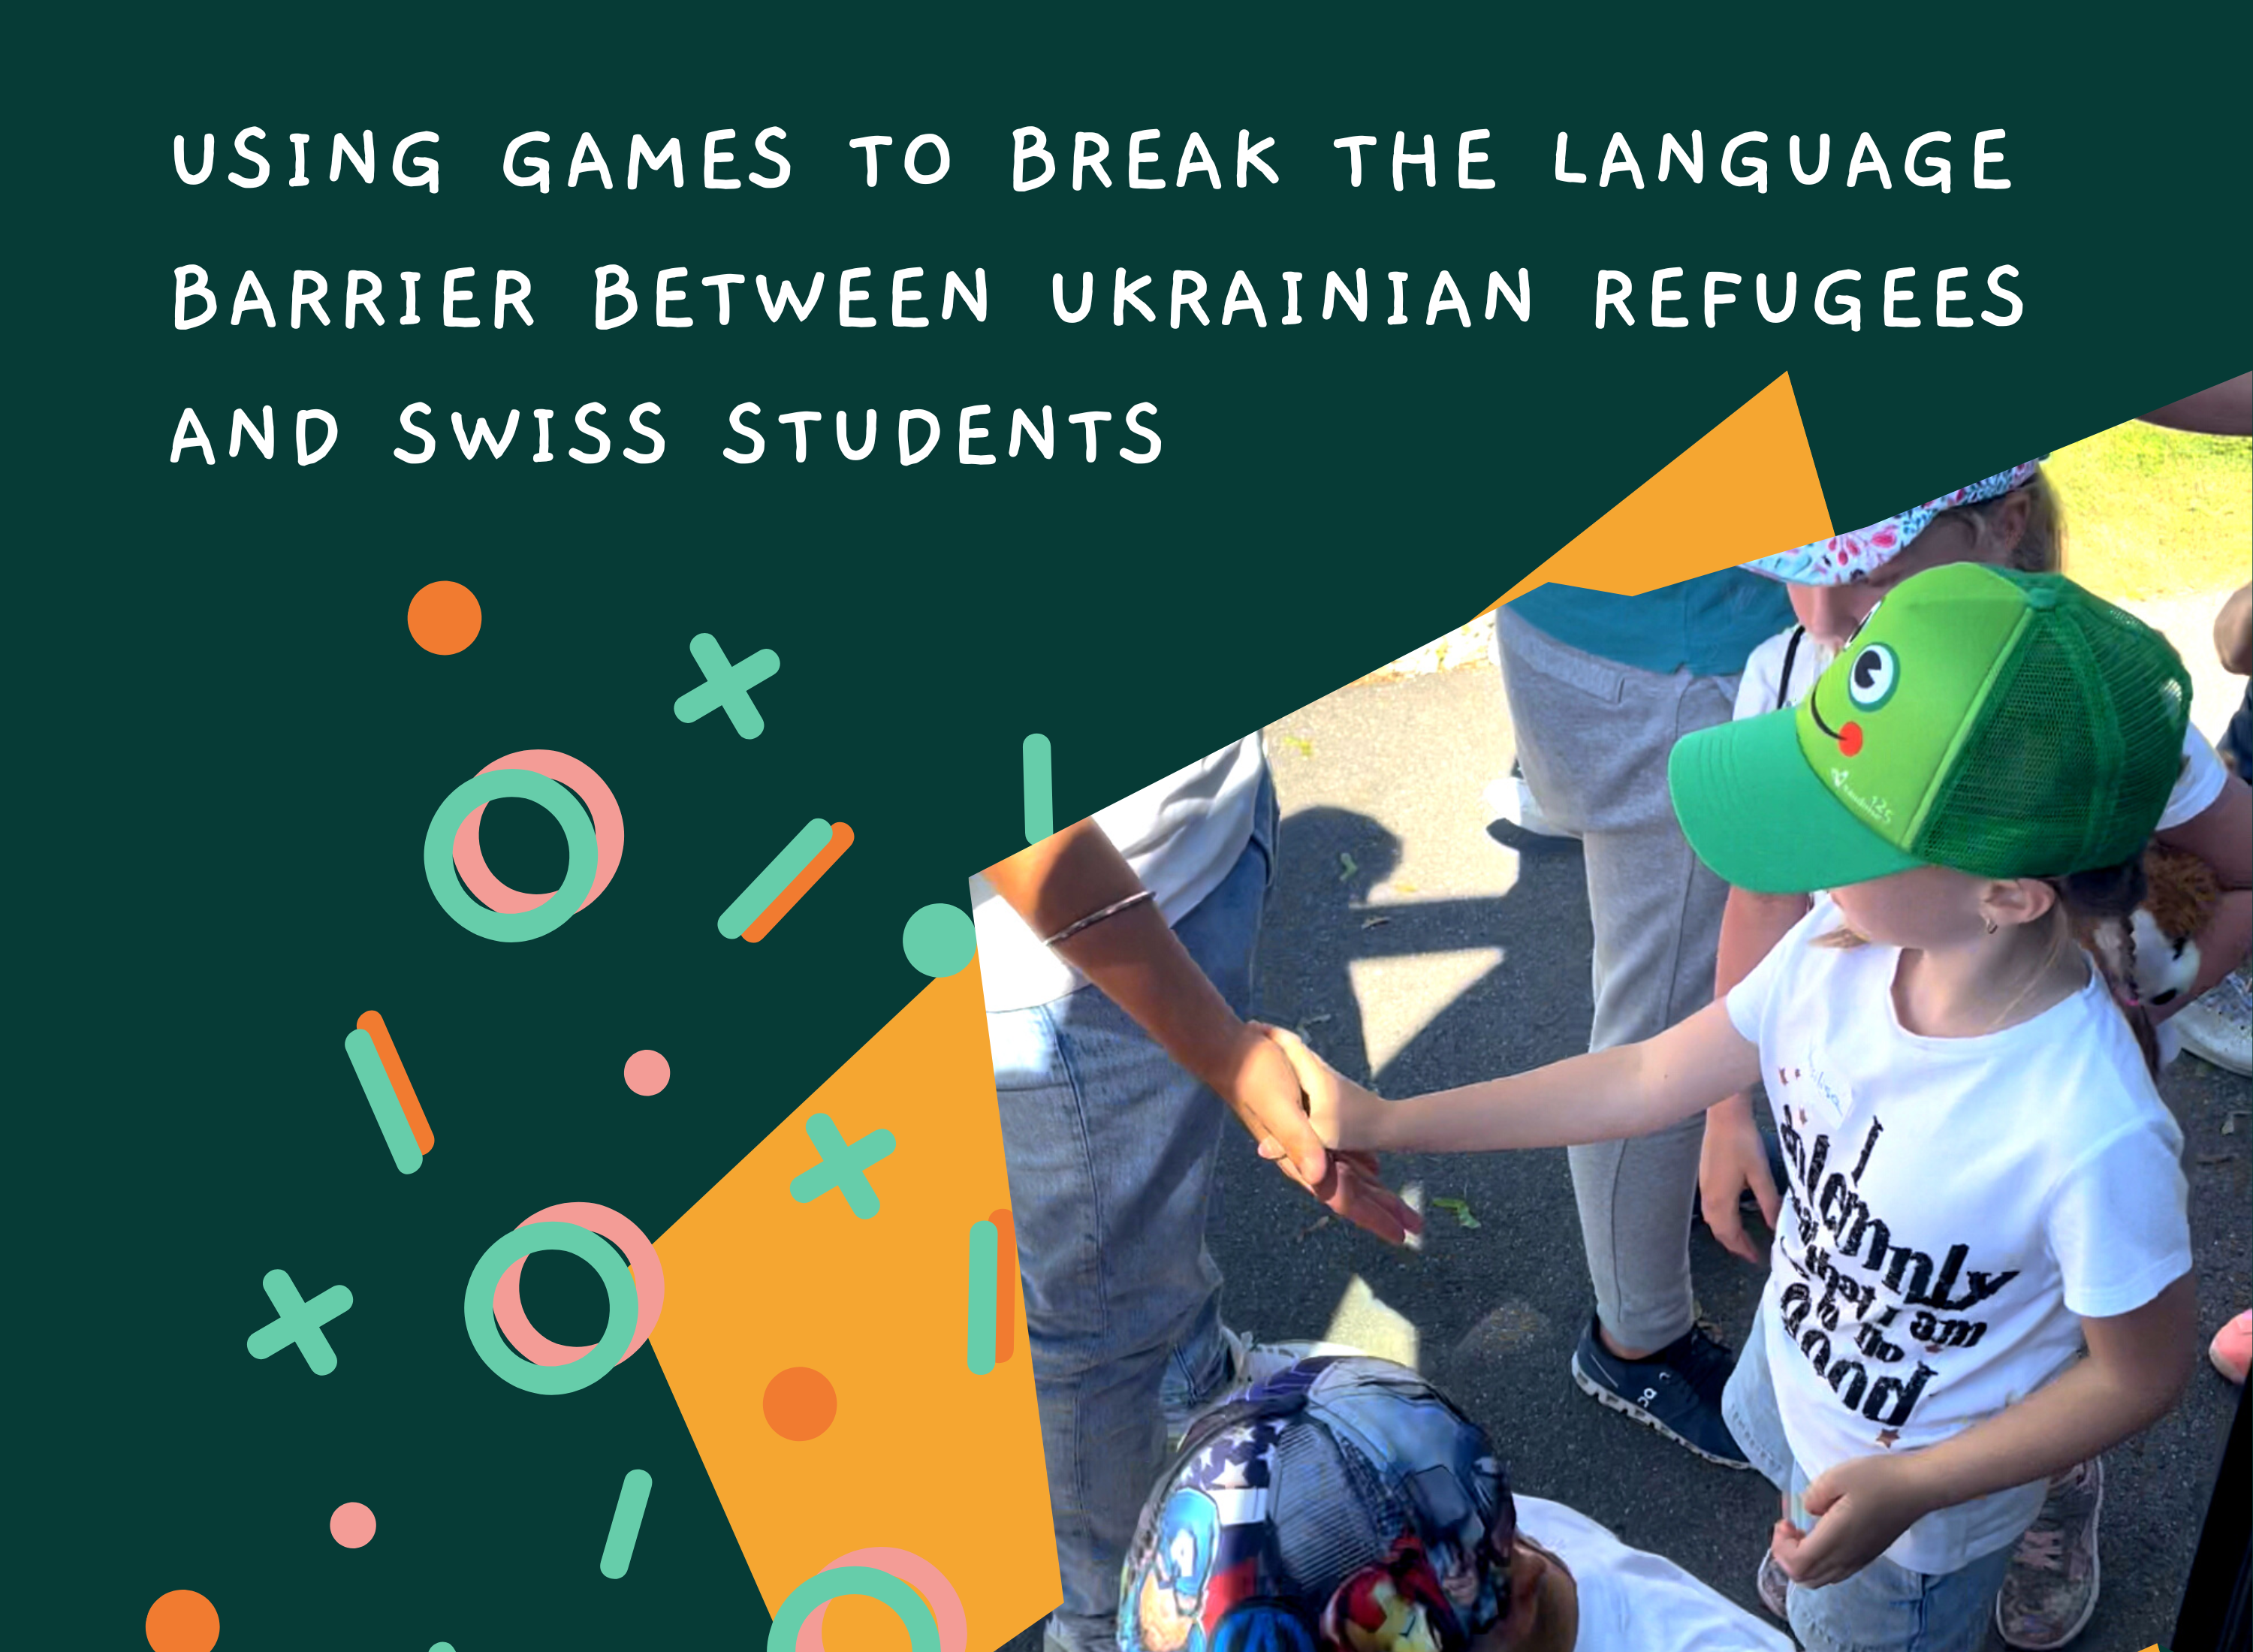 Breaking the Language Barrier Between Ukrainian Refugees and Swiss Students Through Games